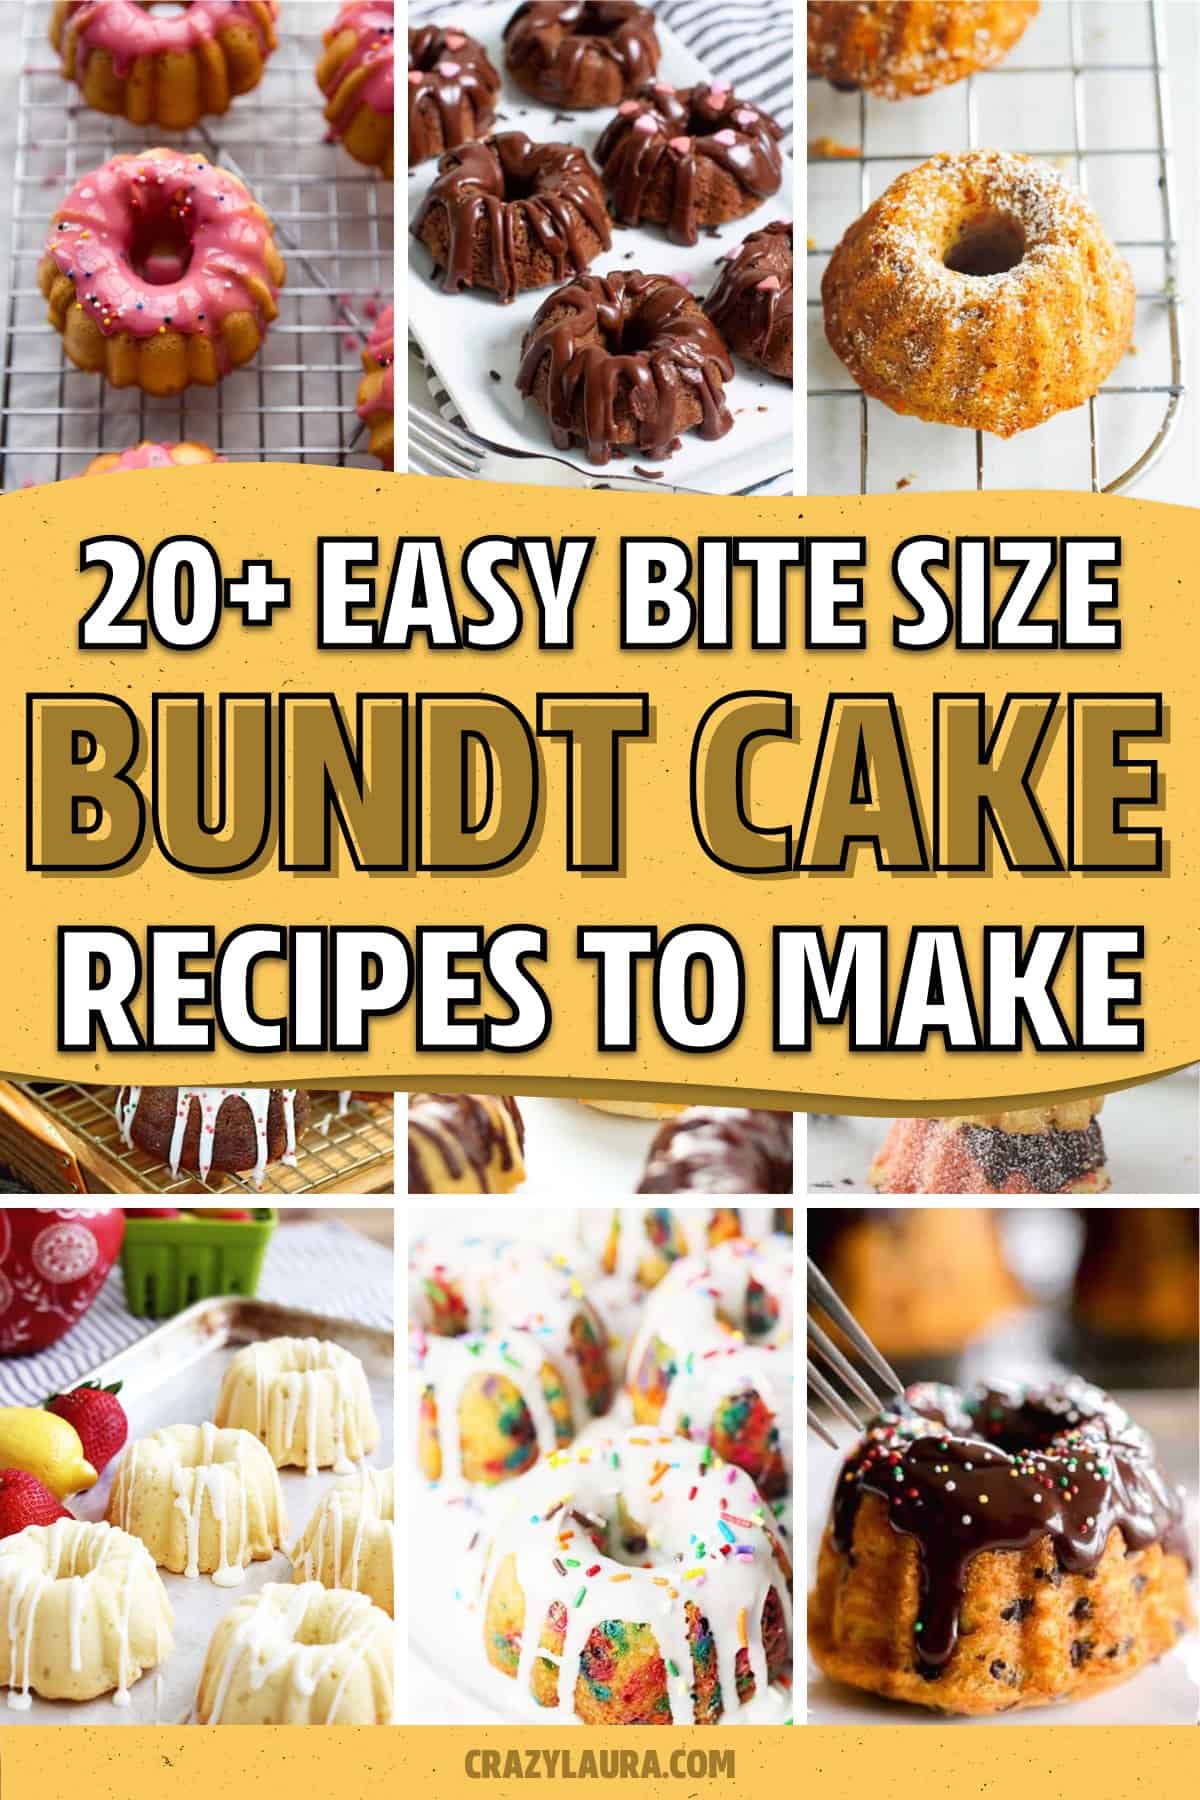 simple to make small bundt cake recipes